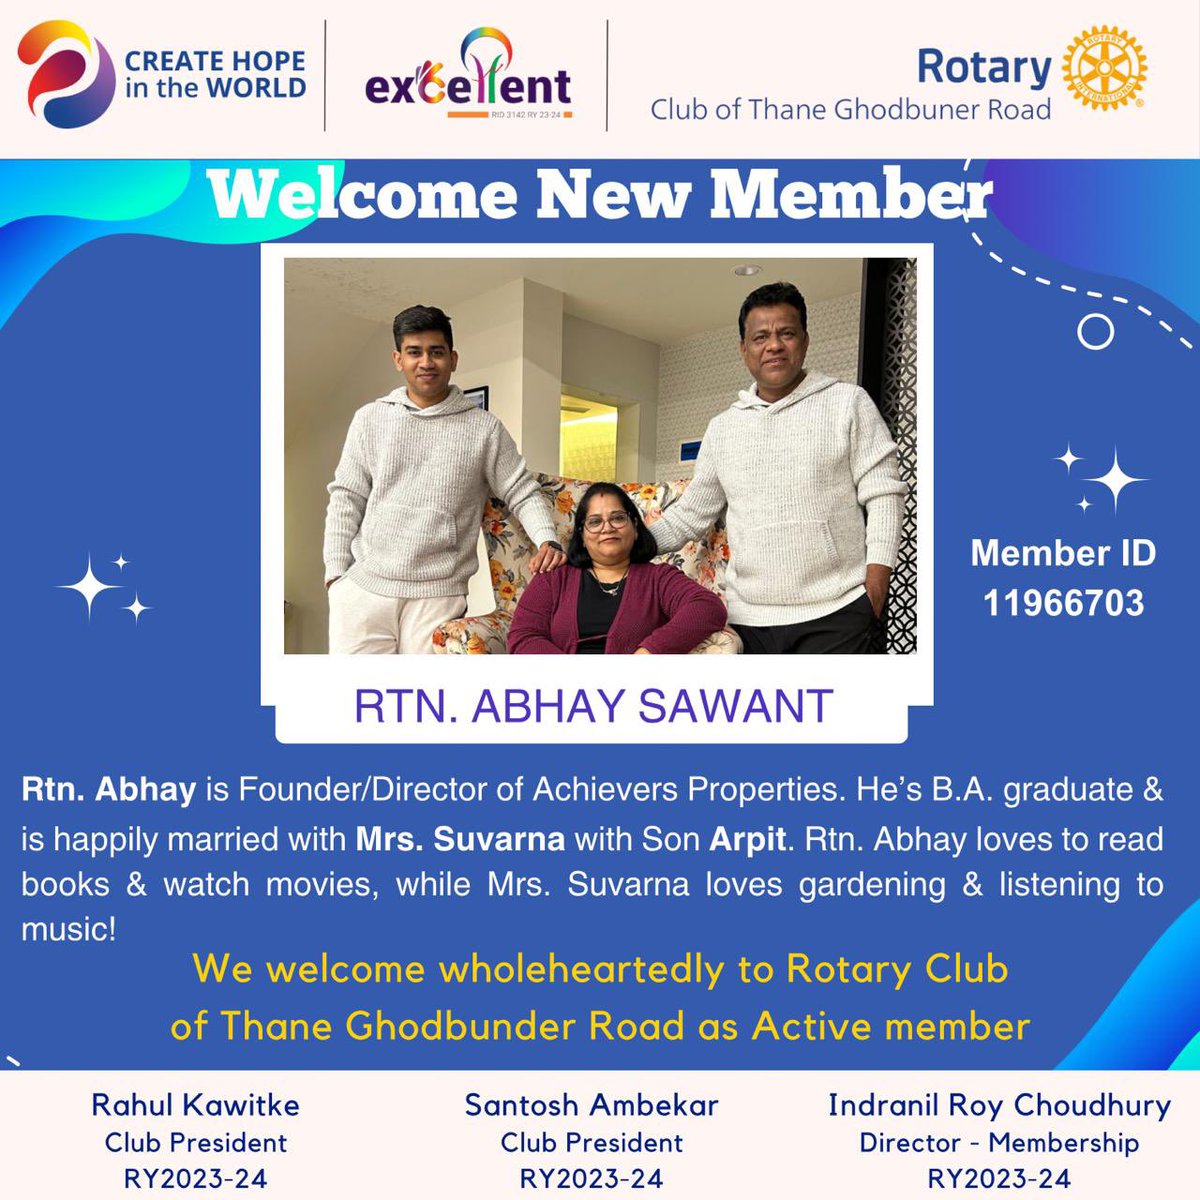 A warm embrace to Rtn. Abhay Sawant and spouse Suvarna as you join our Rotary family at Thane Ghodbunder Road! 

🌐❤️ #RotaryFamily #WelcomeAbhayAndSuvarna #ServiceWithHeart